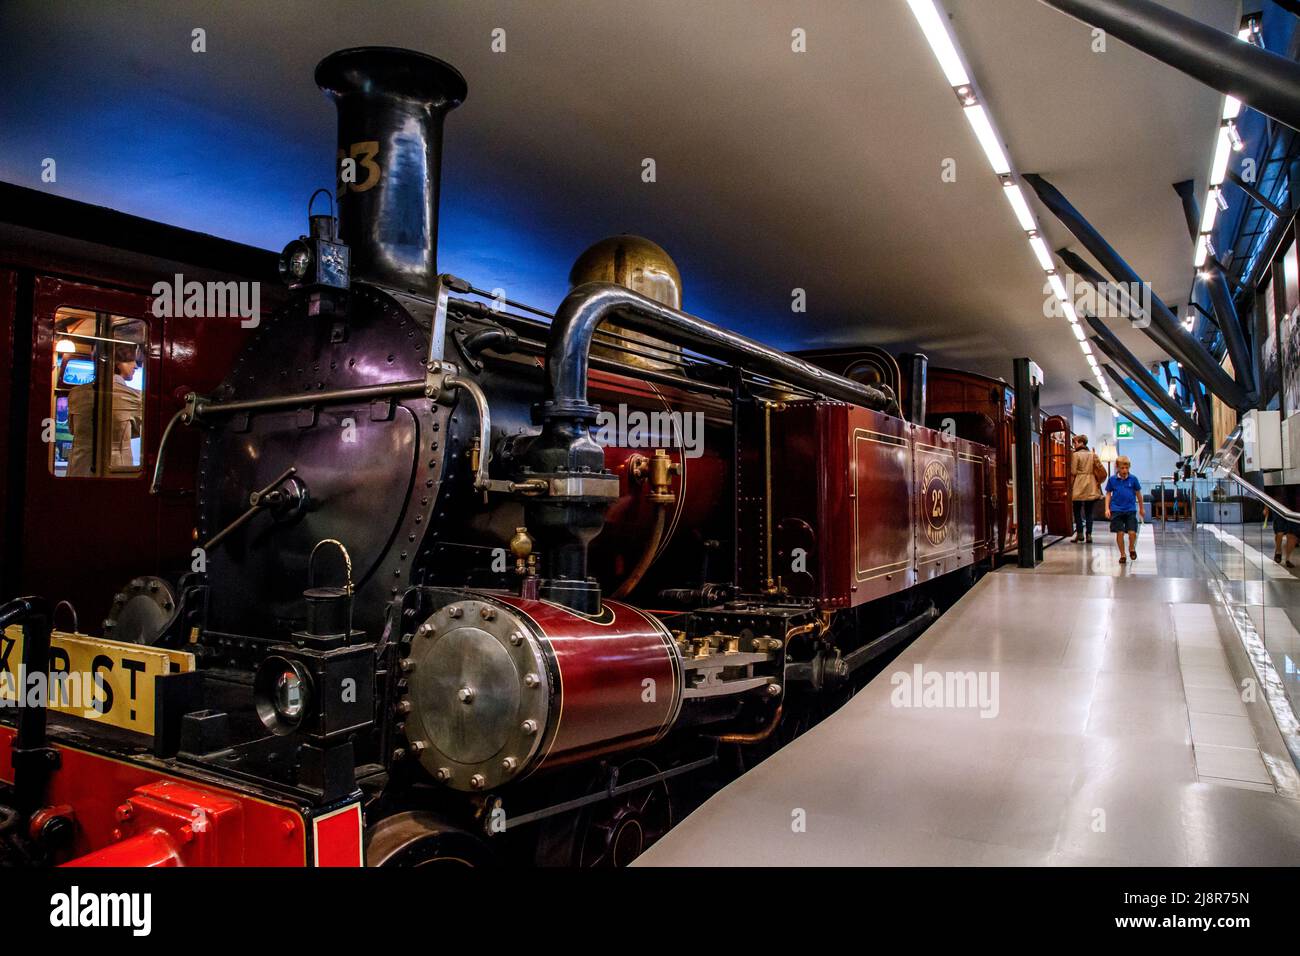 Steam museums london фото 15